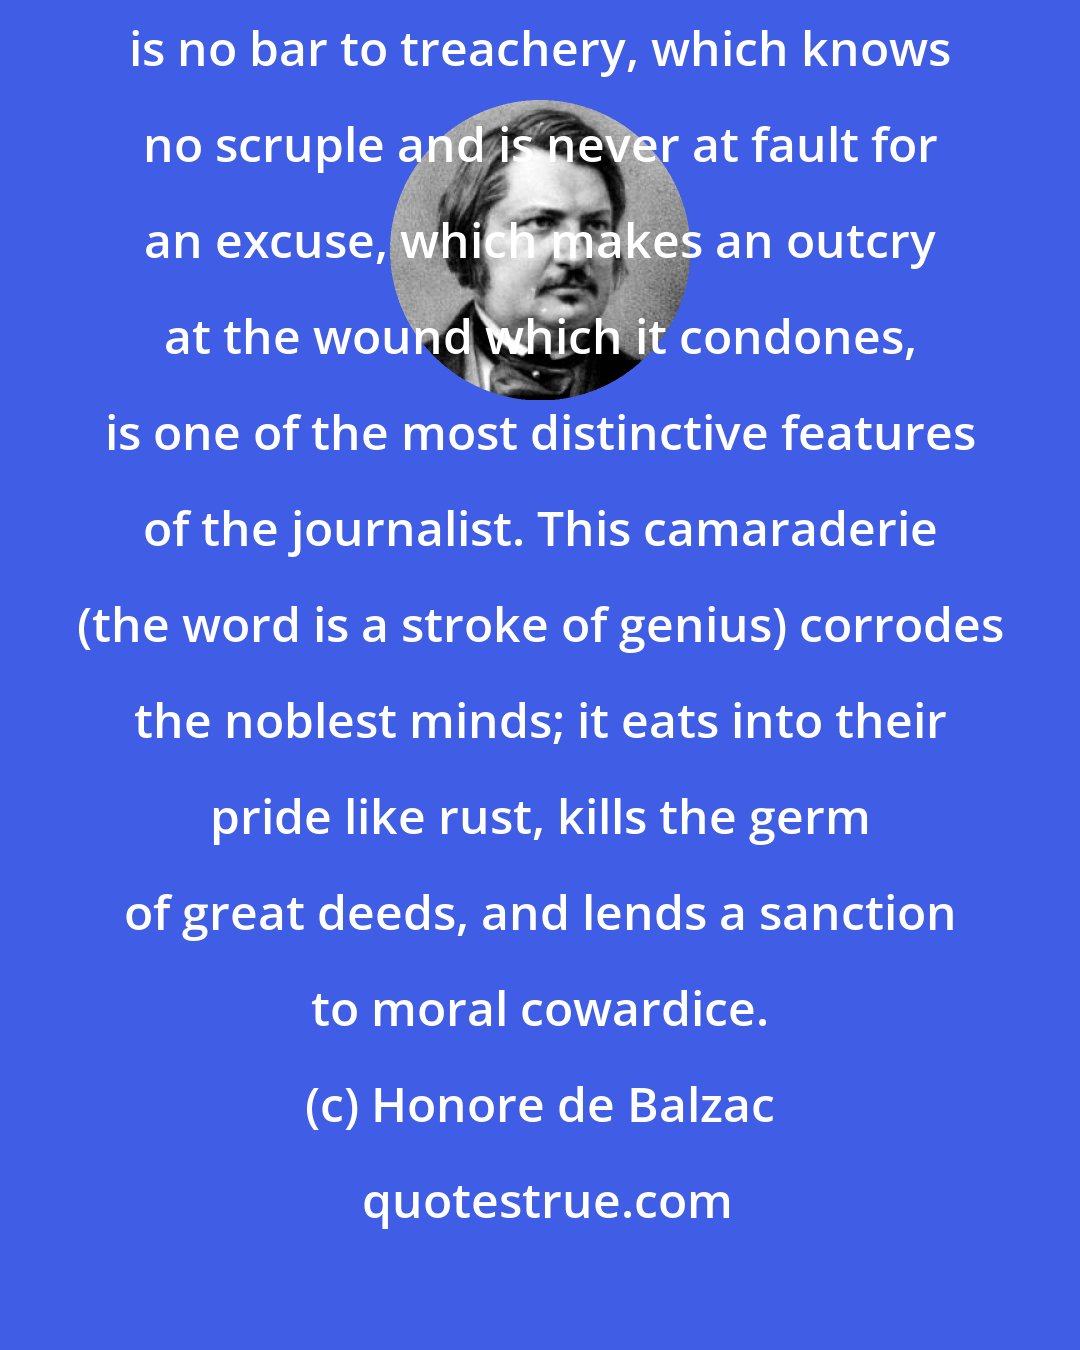 Honore de Balzac: This surface good-nature which captivates a new acquaintance and is no bar to treachery, which knows no scruple and is never at fault for an excuse, which makes an outcry at the wound which it condones, is one of the most distinctive features of the journalist. This camaraderie (the word is a stroke of genius) corrodes the noblest minds; it eats into their pride like rust, kills the germ of great deeds, and lends a sanction to moral cowardice.